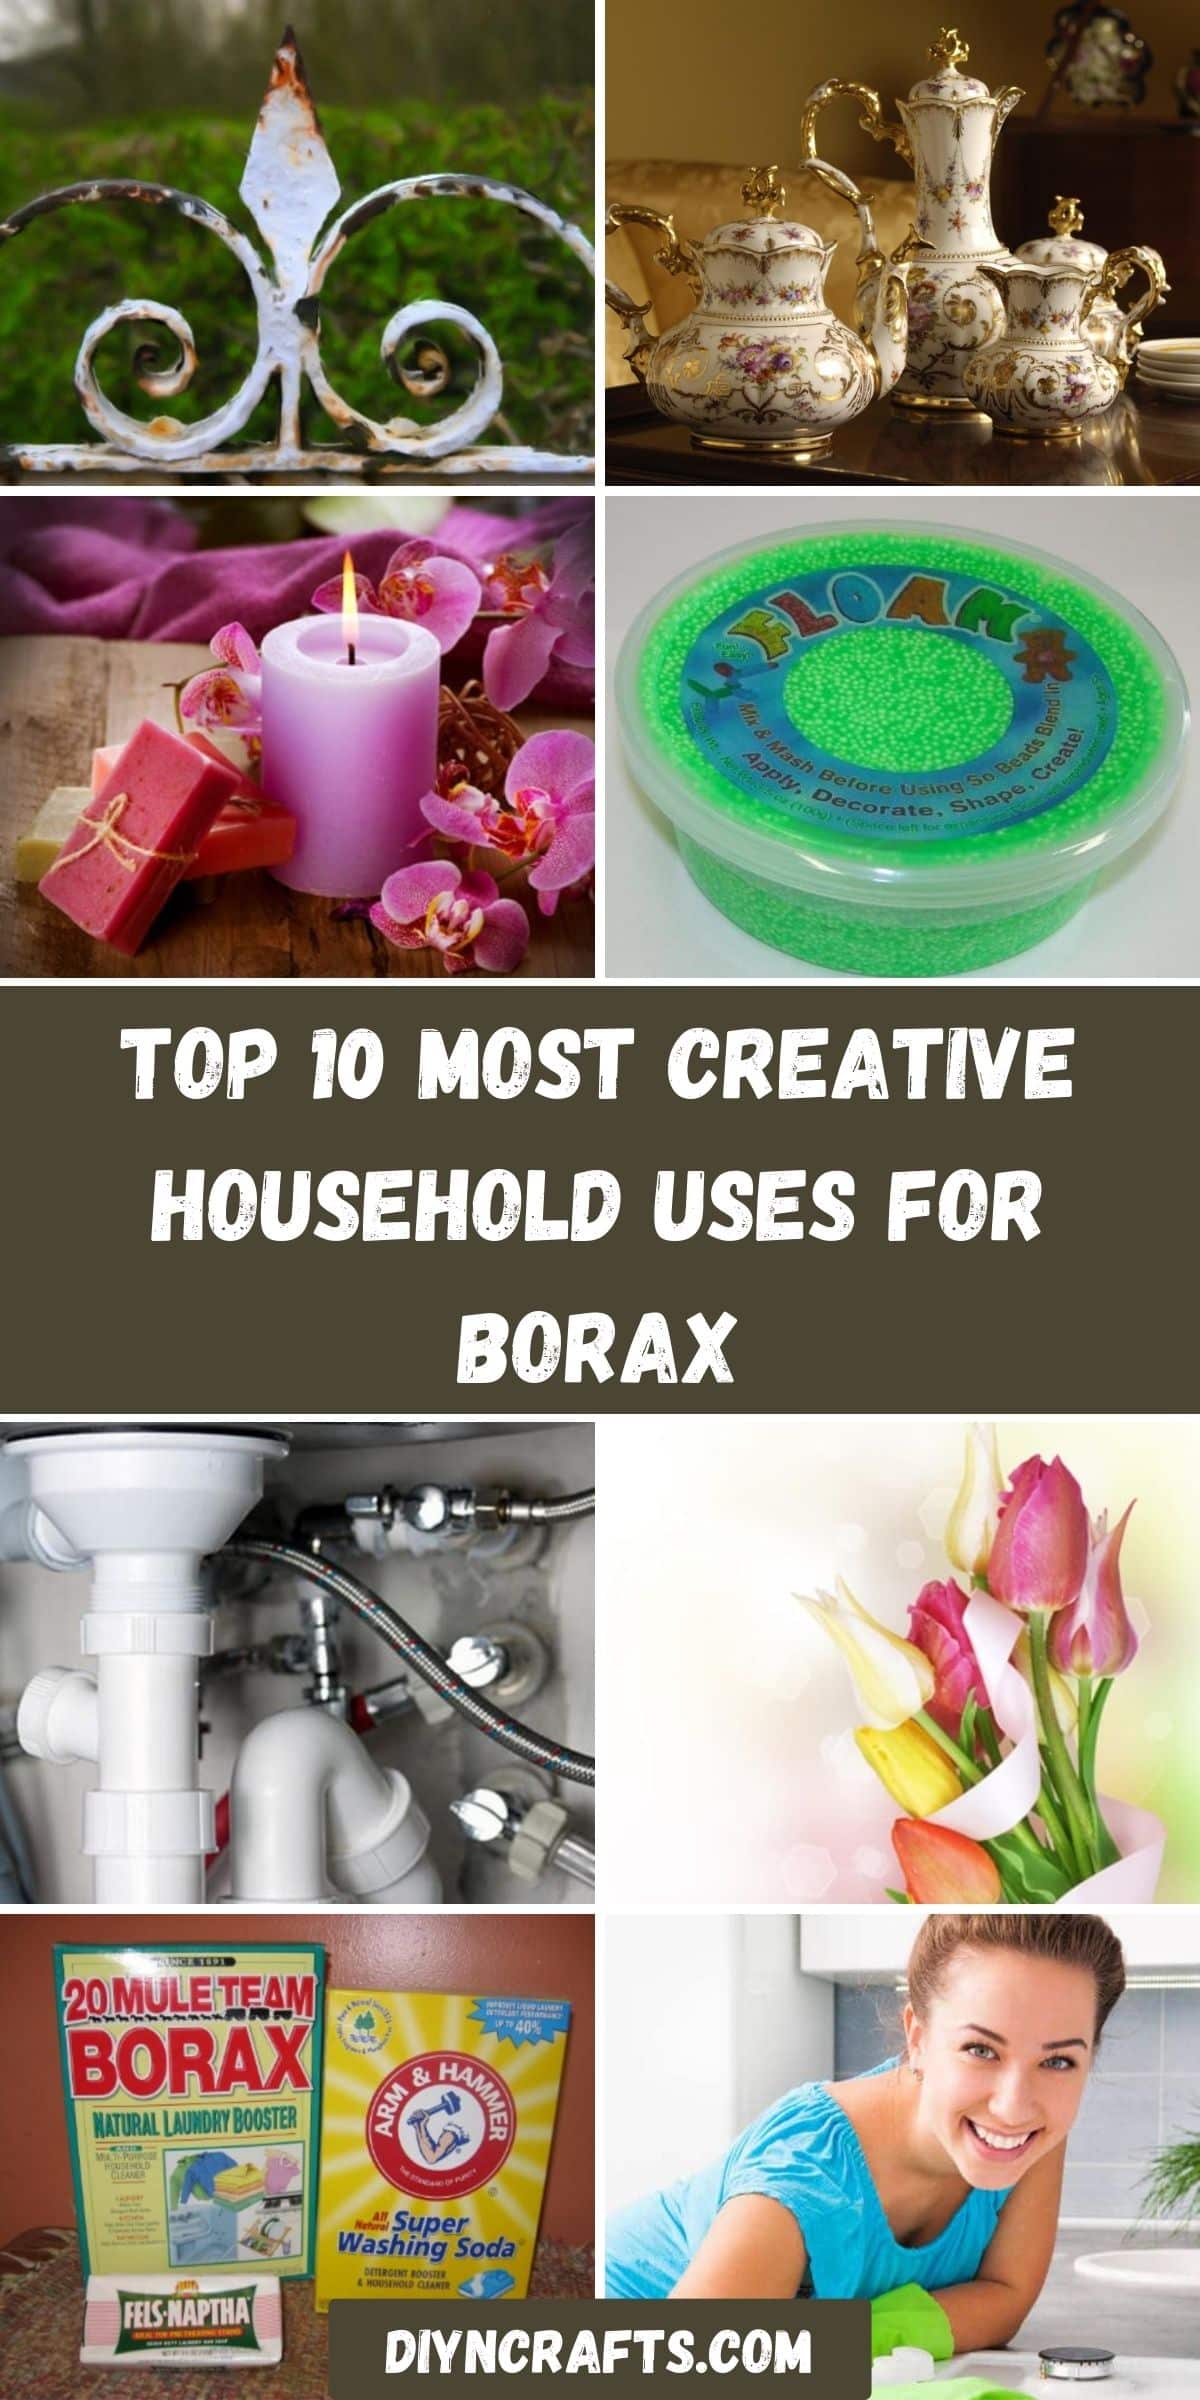 Top 10 Most Creative Household Uses for Borax collage.